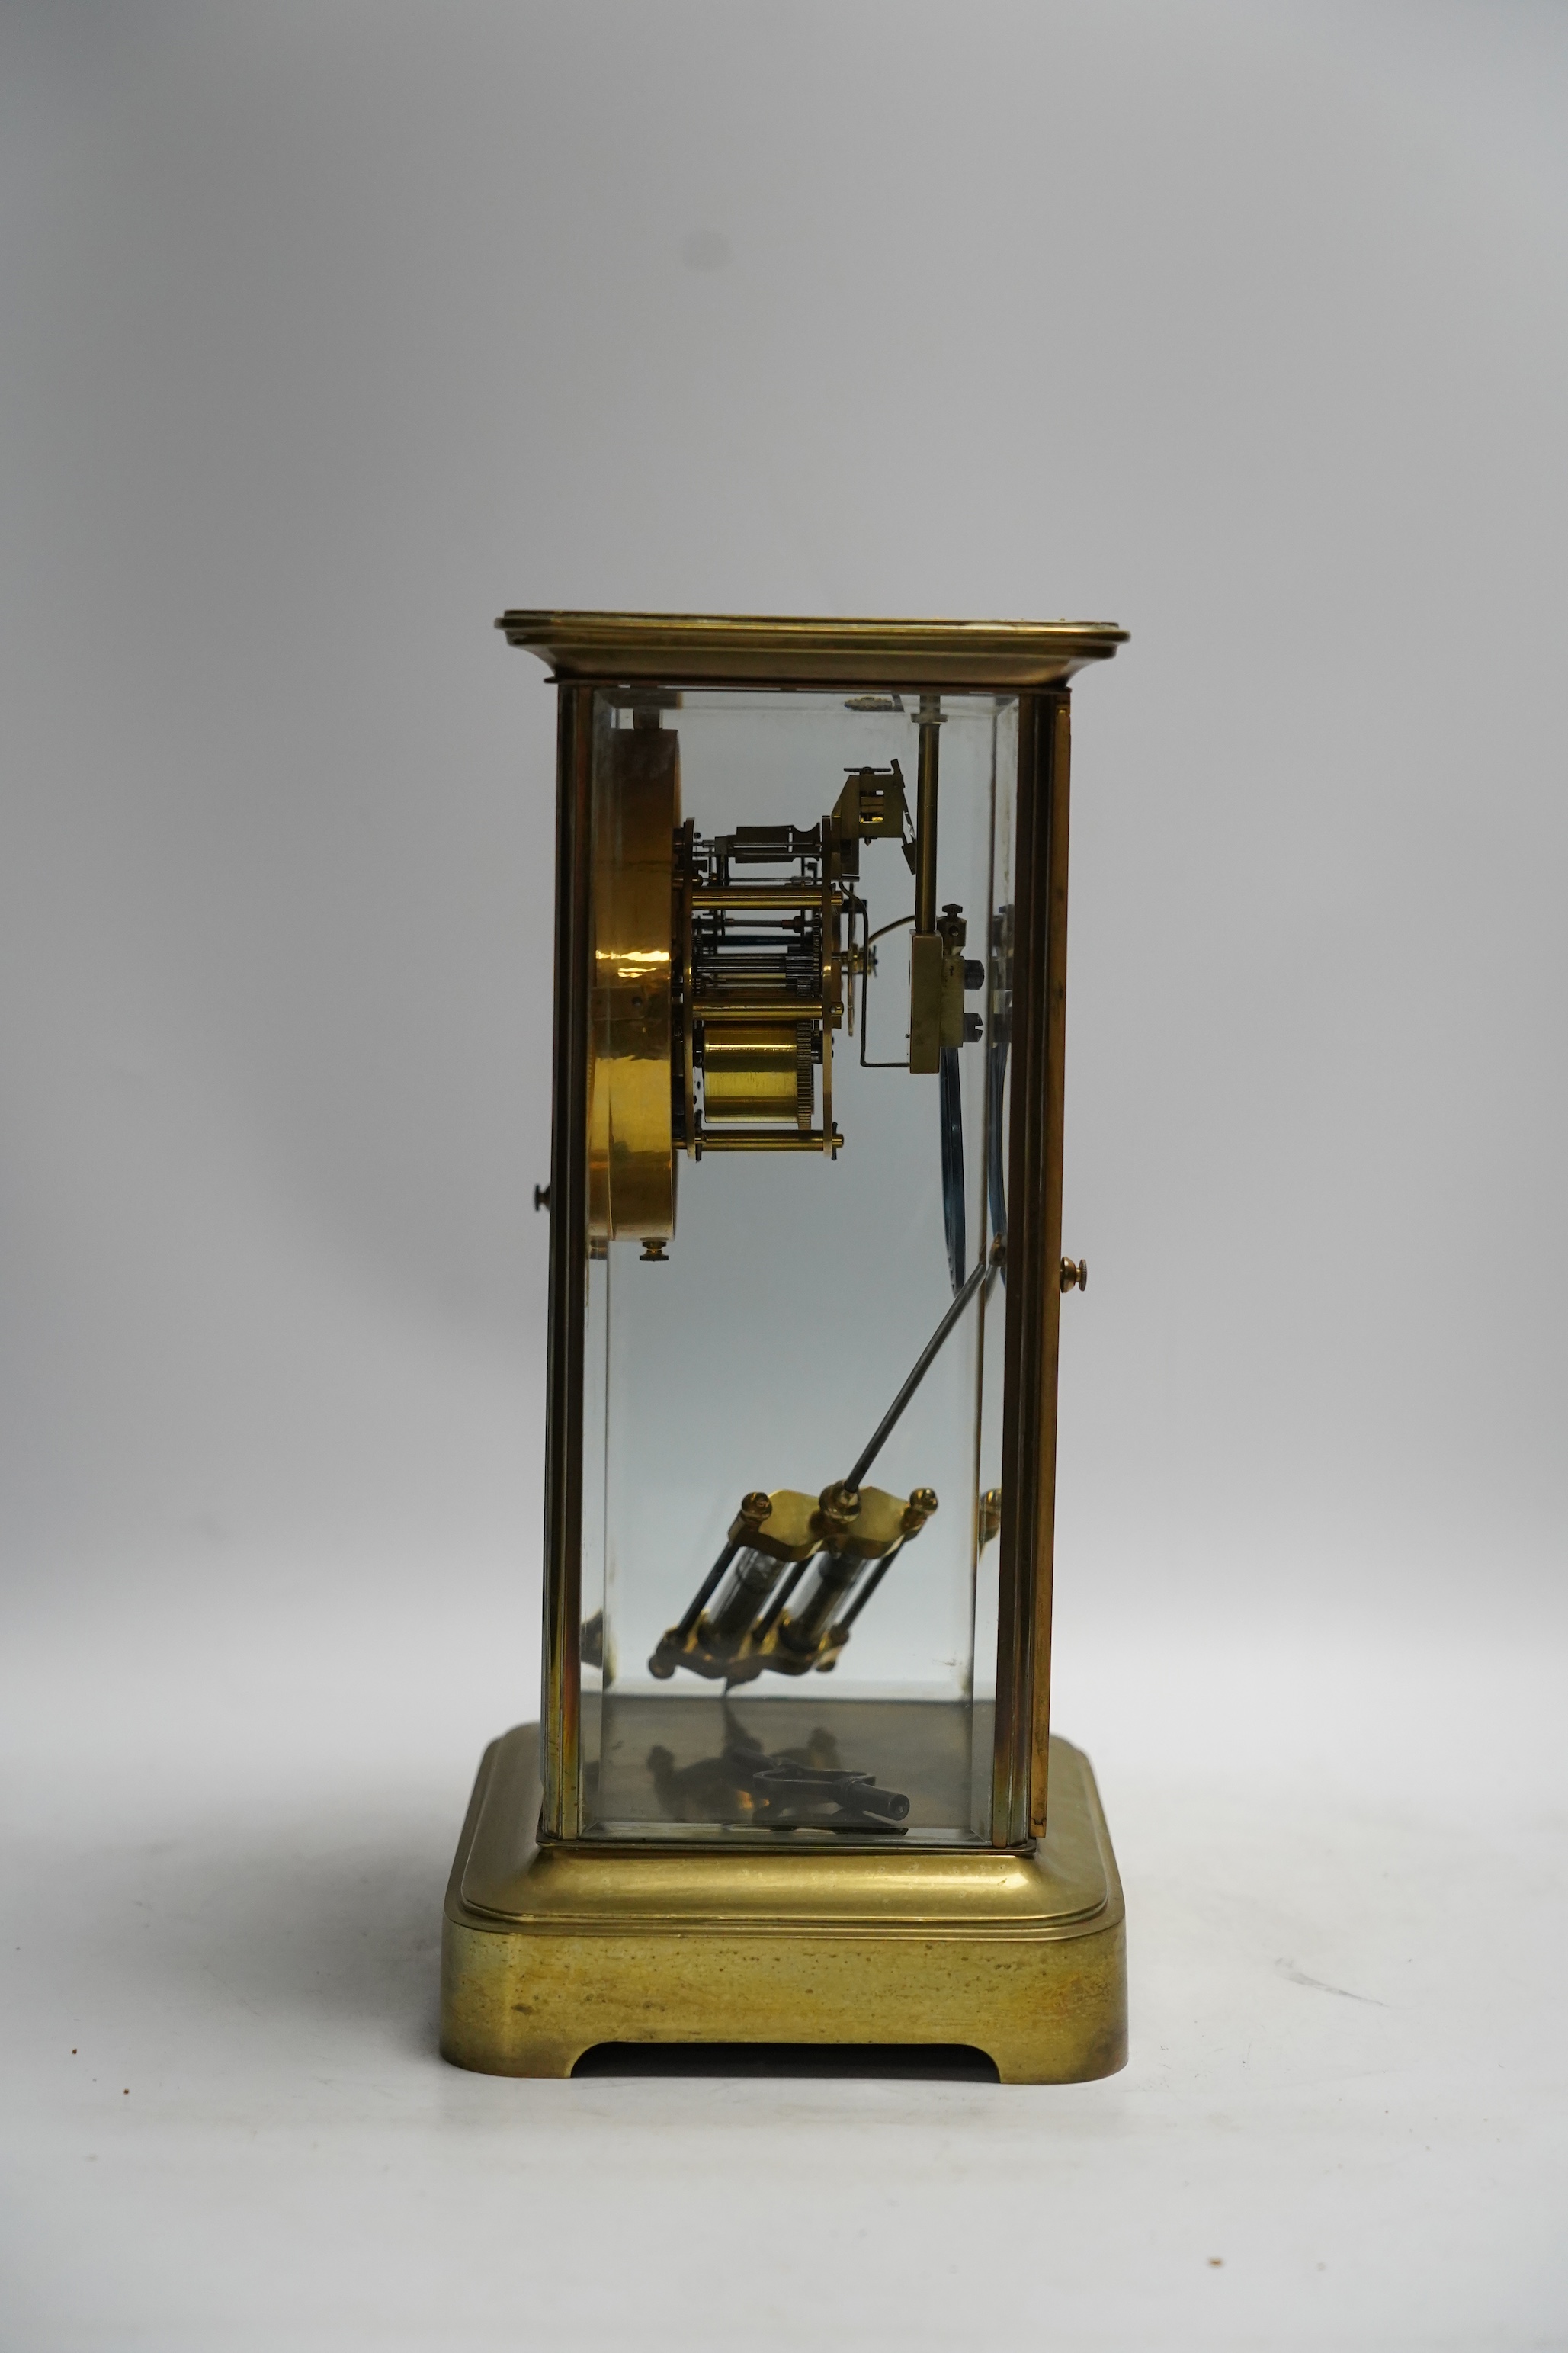 A French four glass mantel clock with mercury suspension and pendulum, 33cm